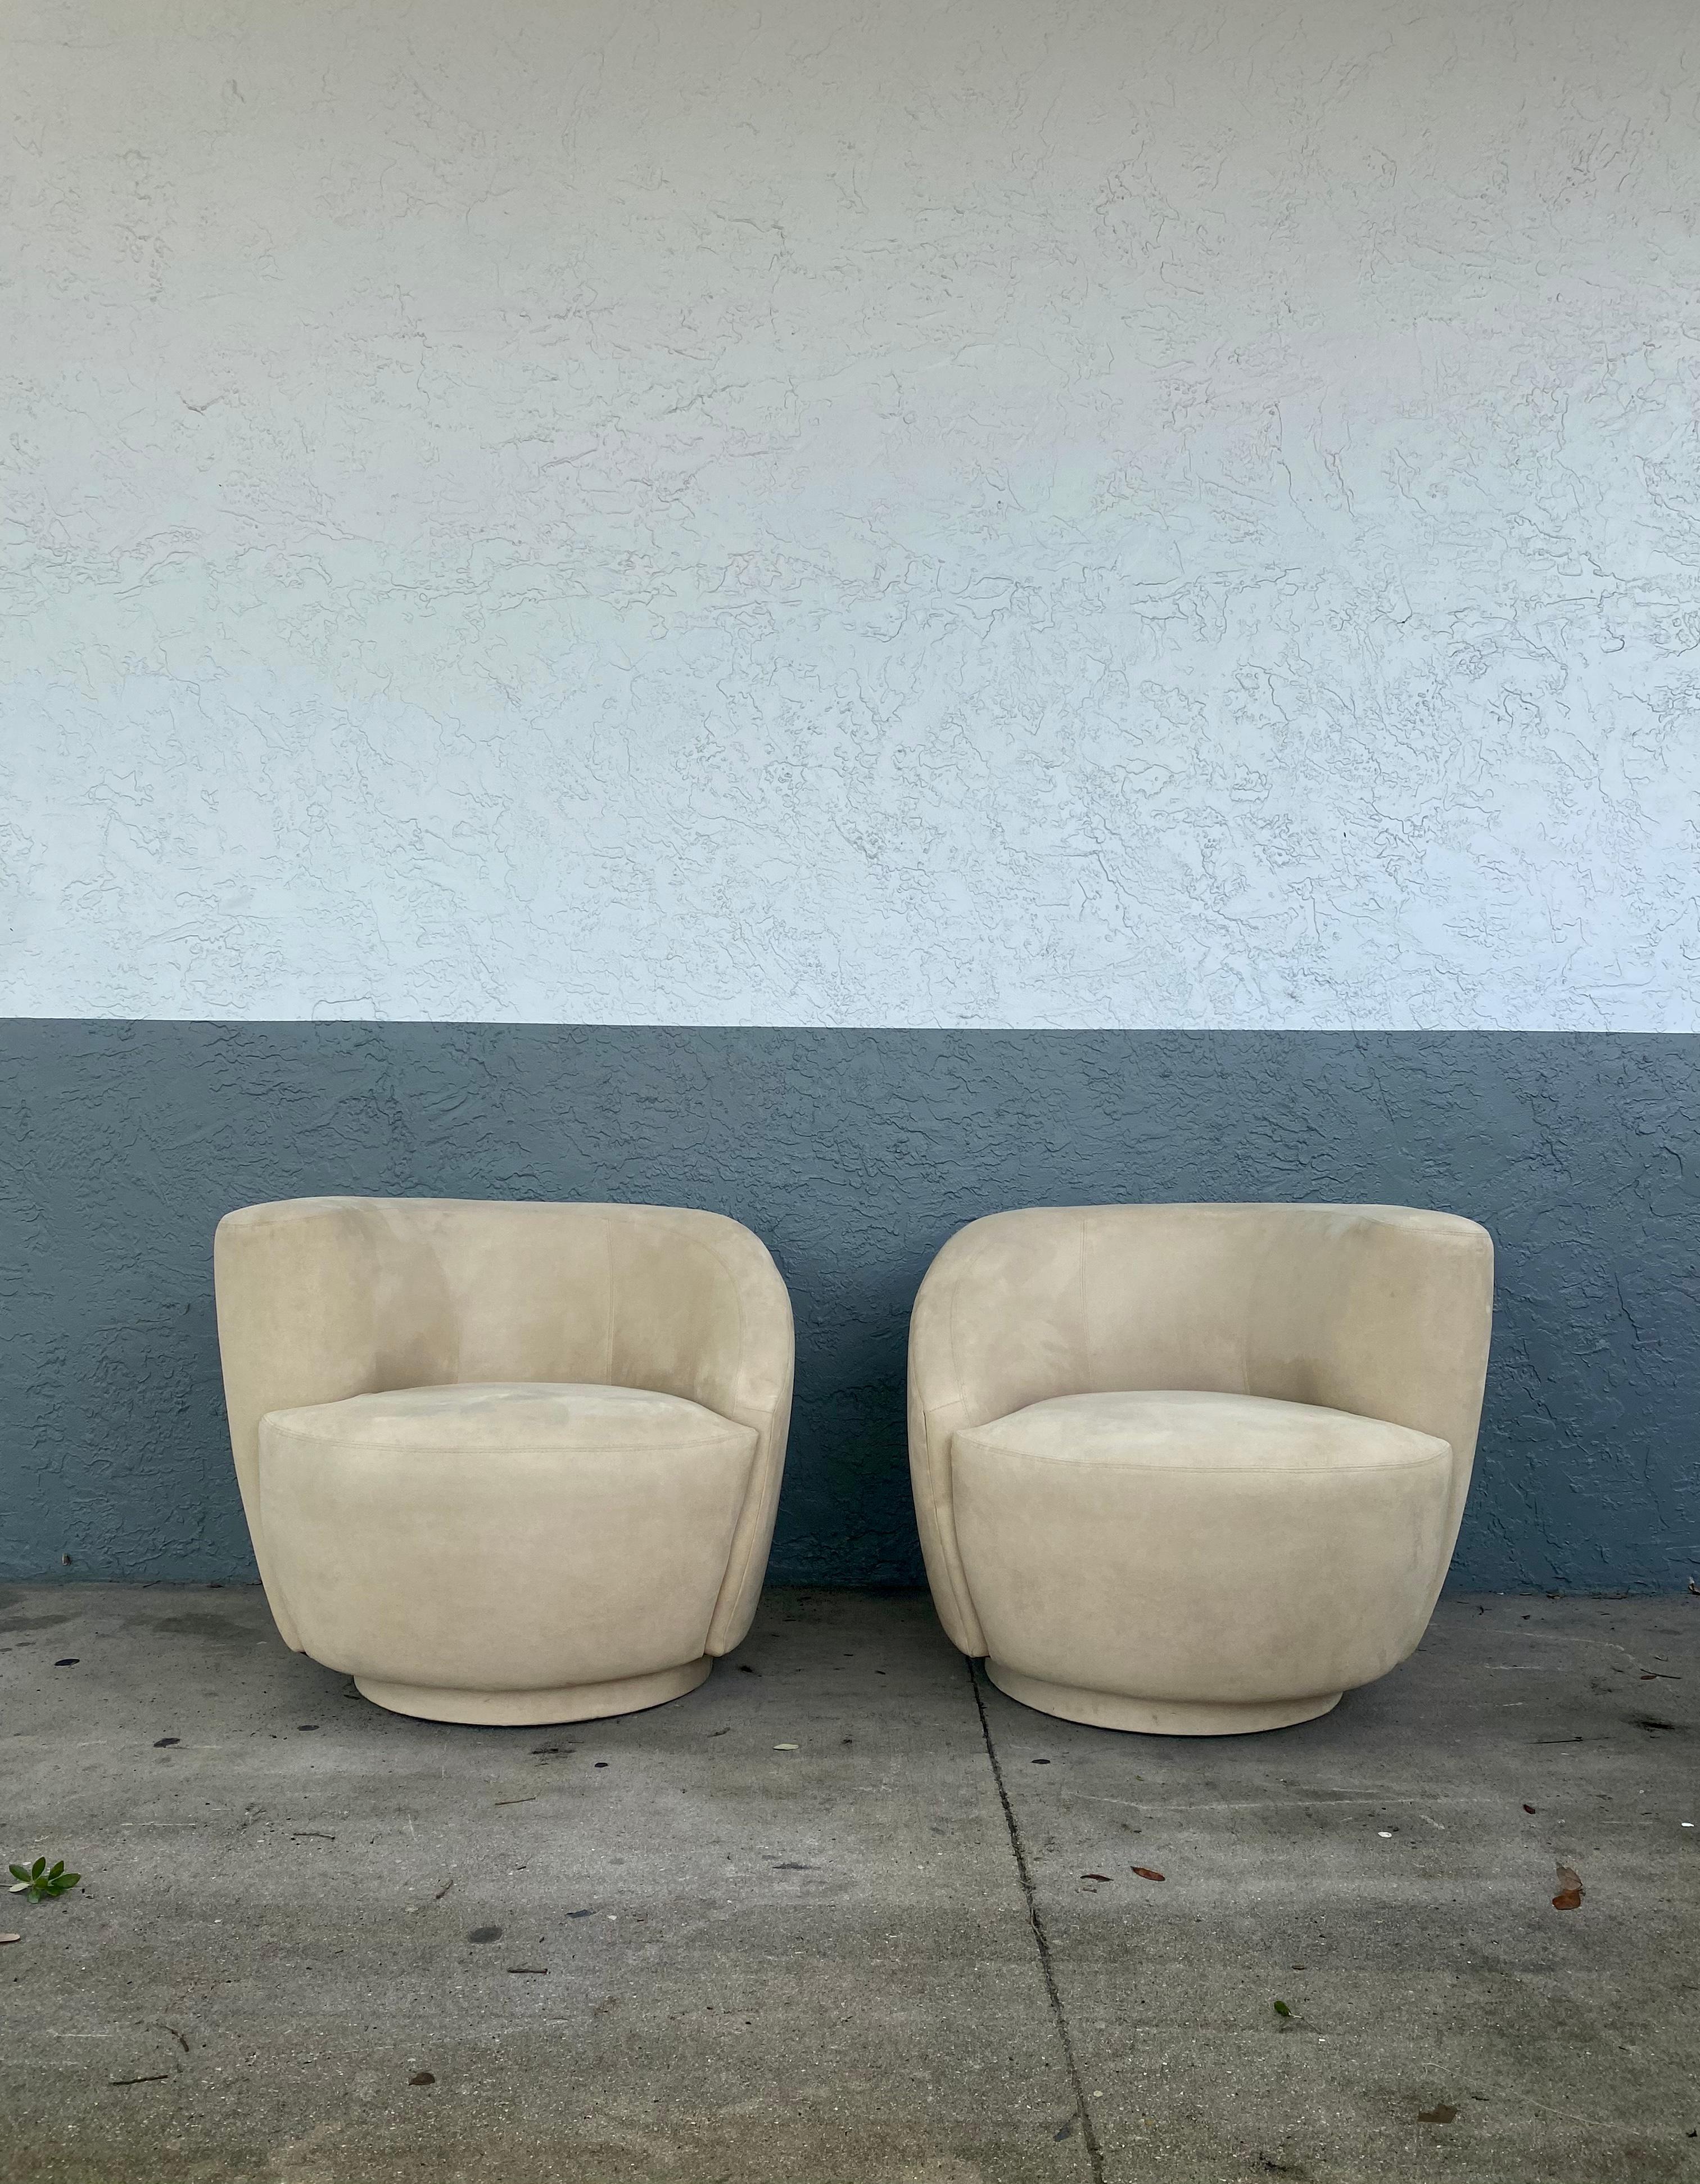 These Iconic swivel chairs are packed with personality! Outstanding design is exhibited throughout the monumental form. Post modern designed by Vladimir Kagan. The unique corkscrew shape in original light beige alcantara suede upholstery also